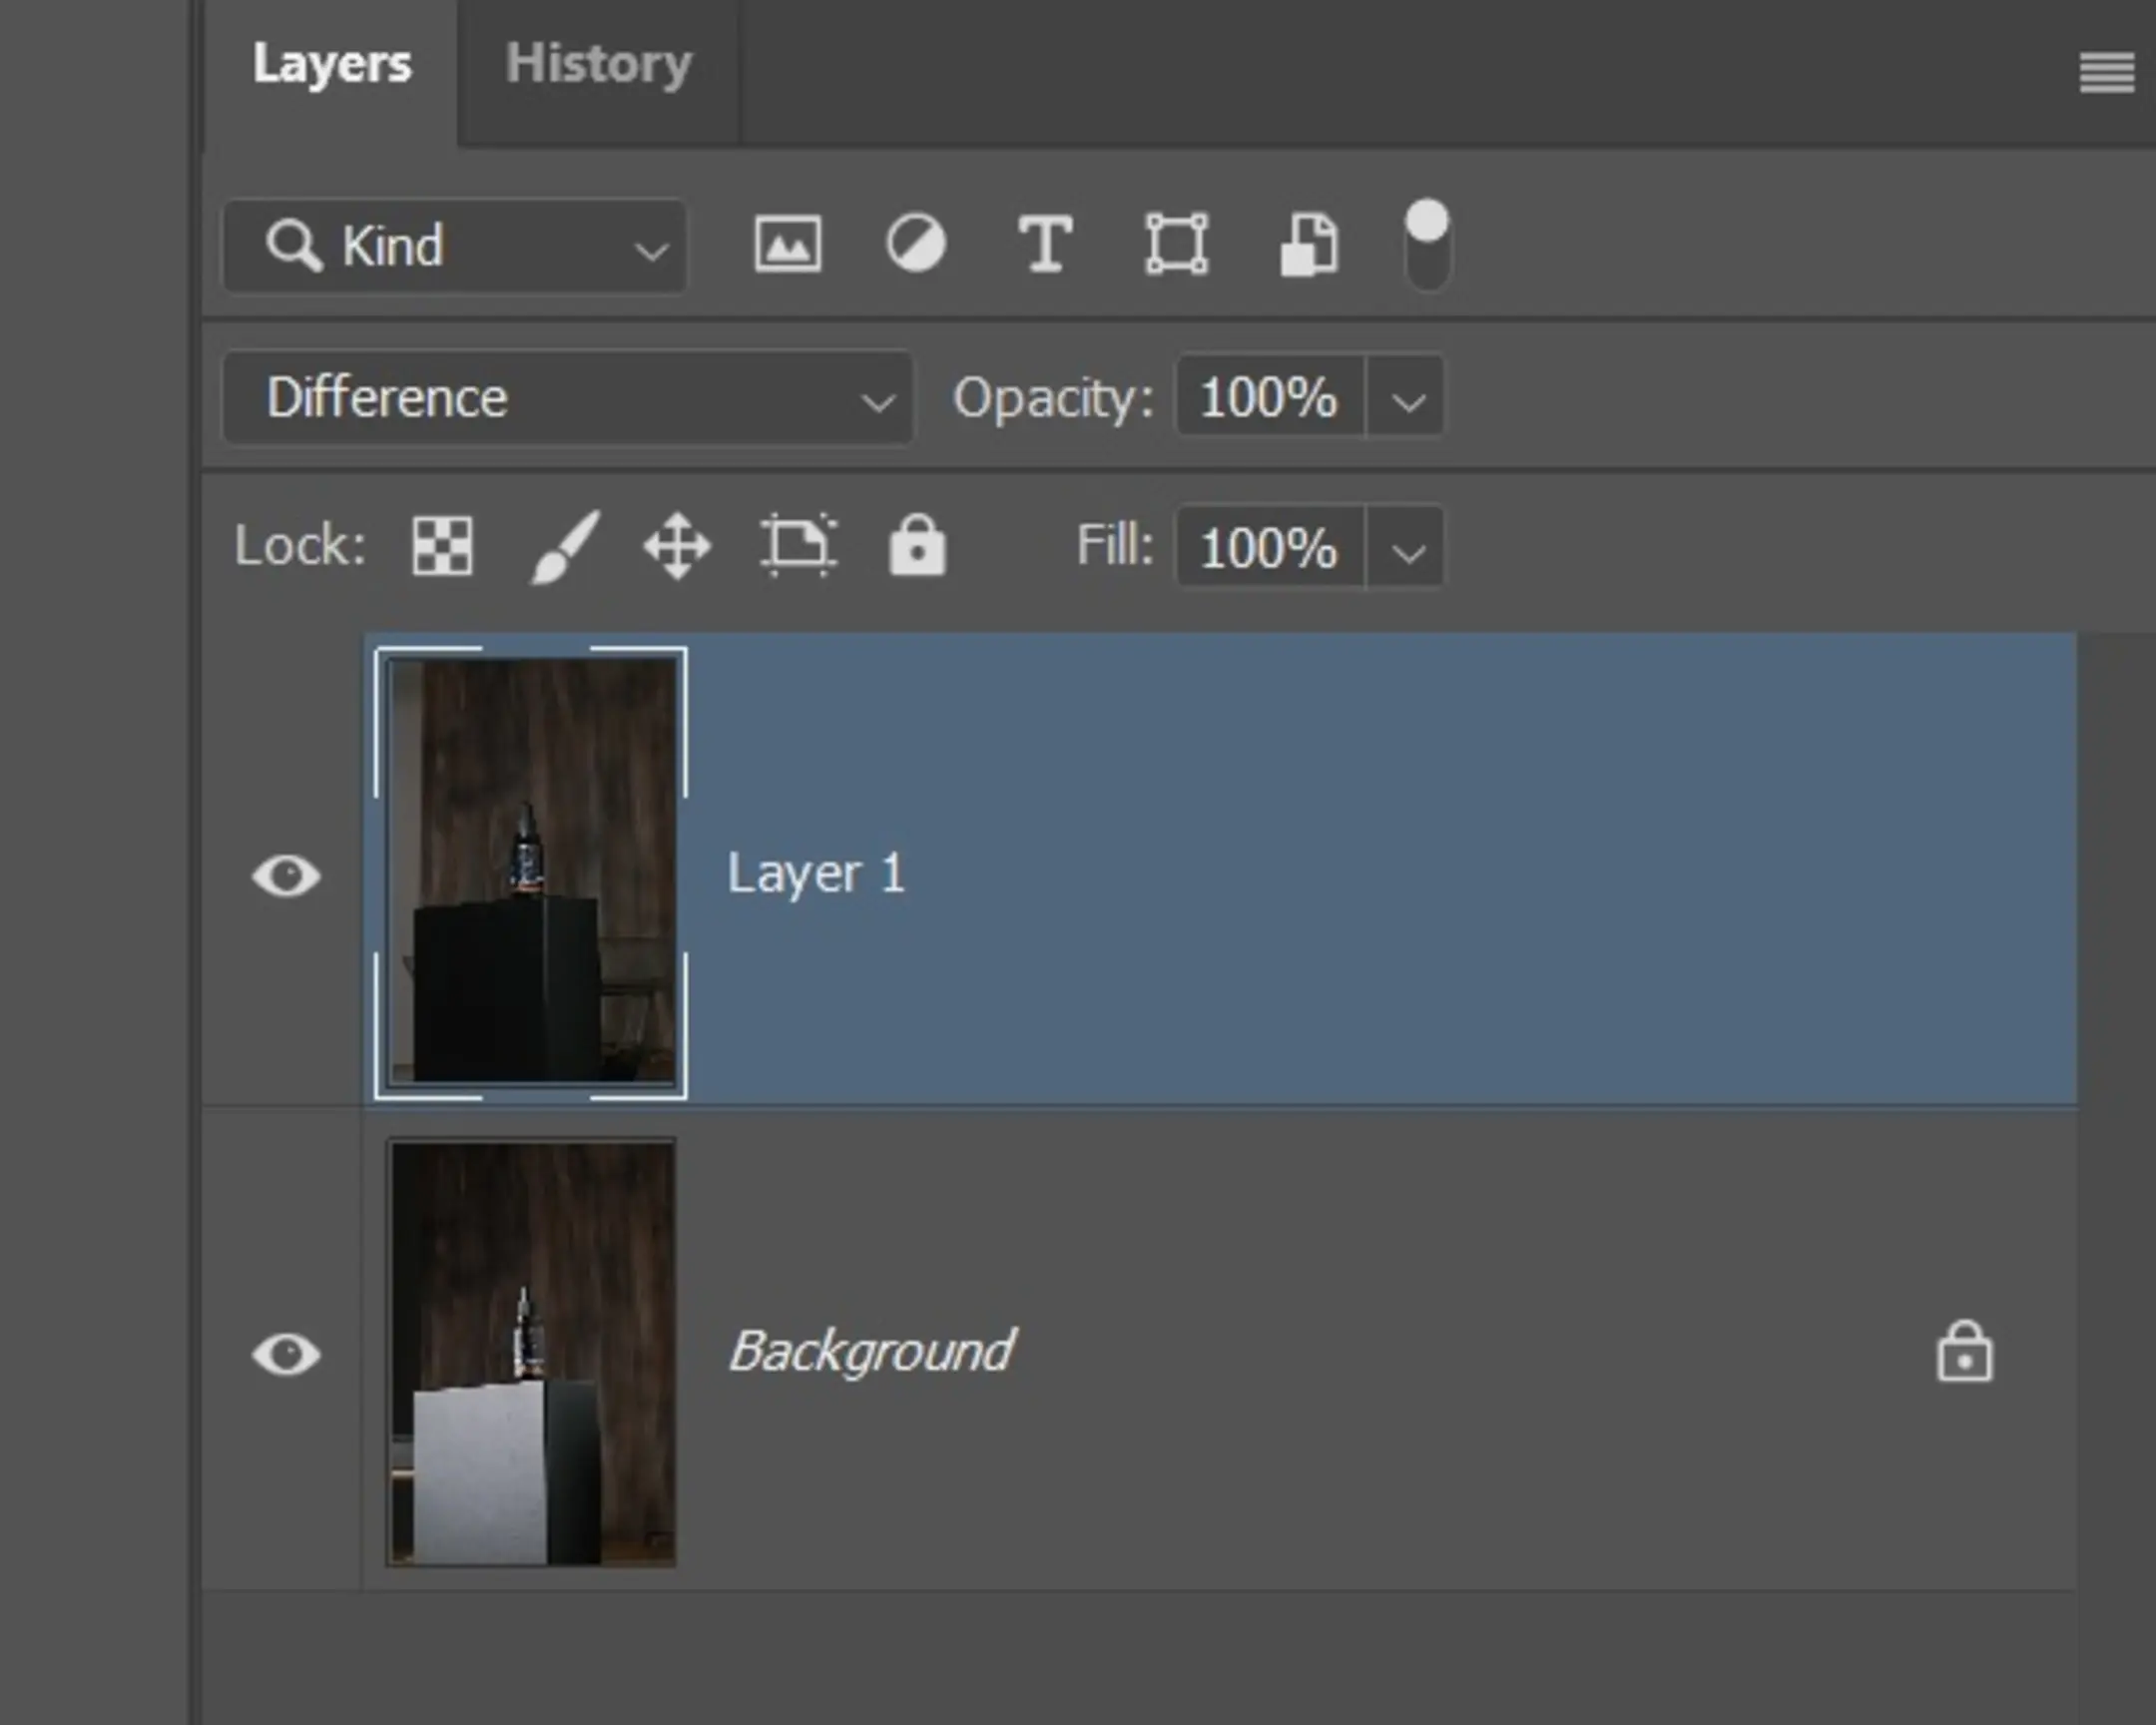 Photoshop. The picture shows the overlay of layers in Photoshop. The blending mode is Difference.